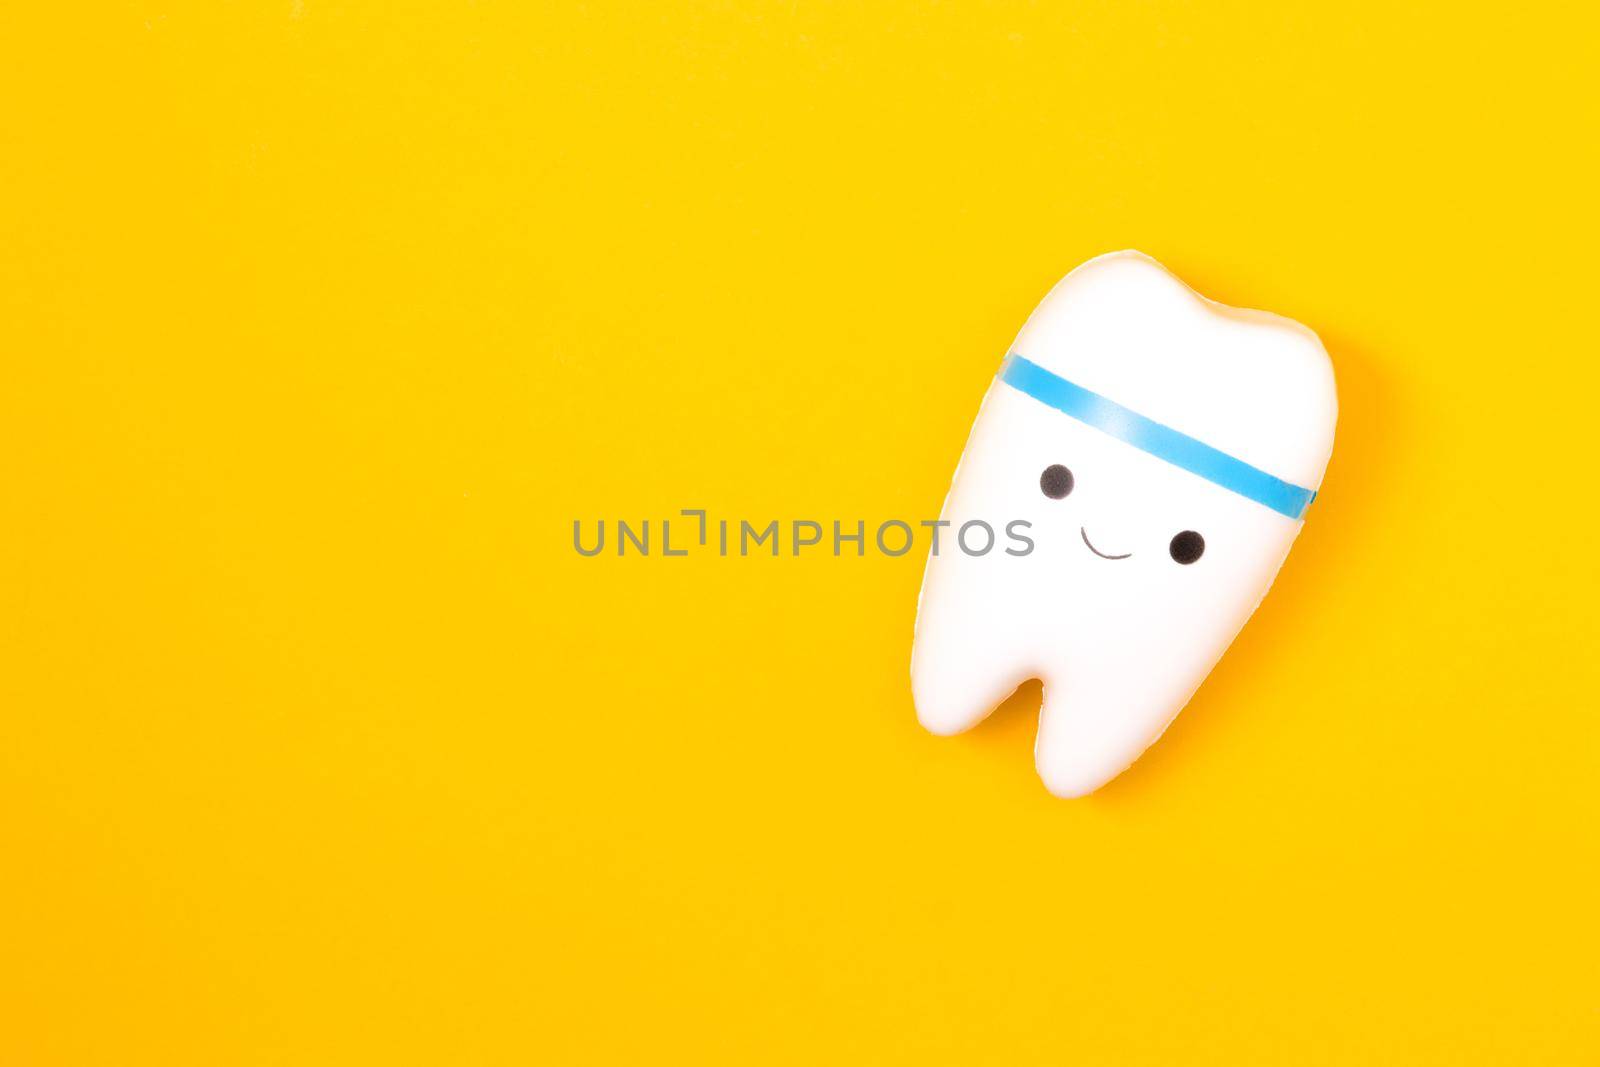 dentistry concept, treatment of toothache in children by natashko